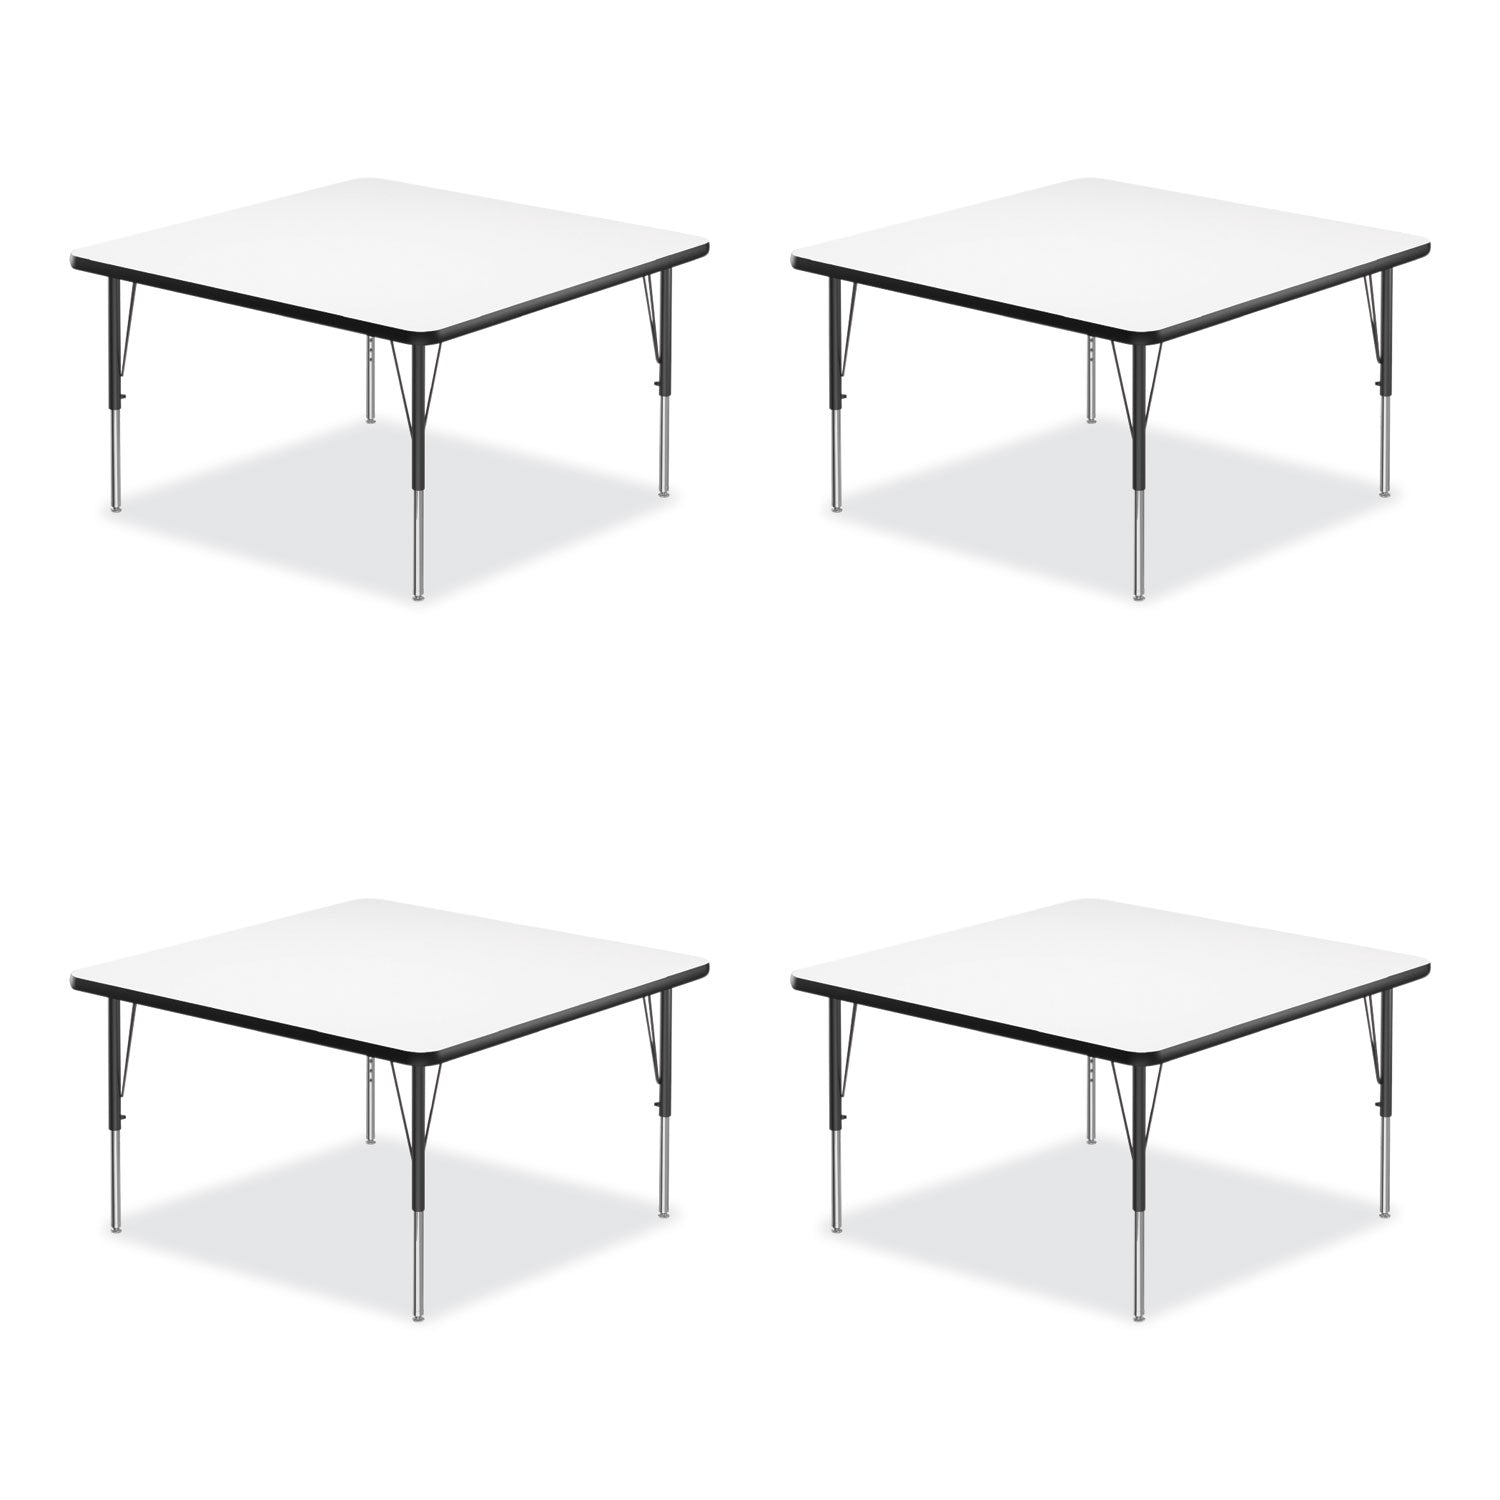 markerboard-activity-tables-square-48-x-48-x-19-to-29-white-top-black-legs-4-pallet-ships-in-4-6-business-days_crl4848de80954p - 1